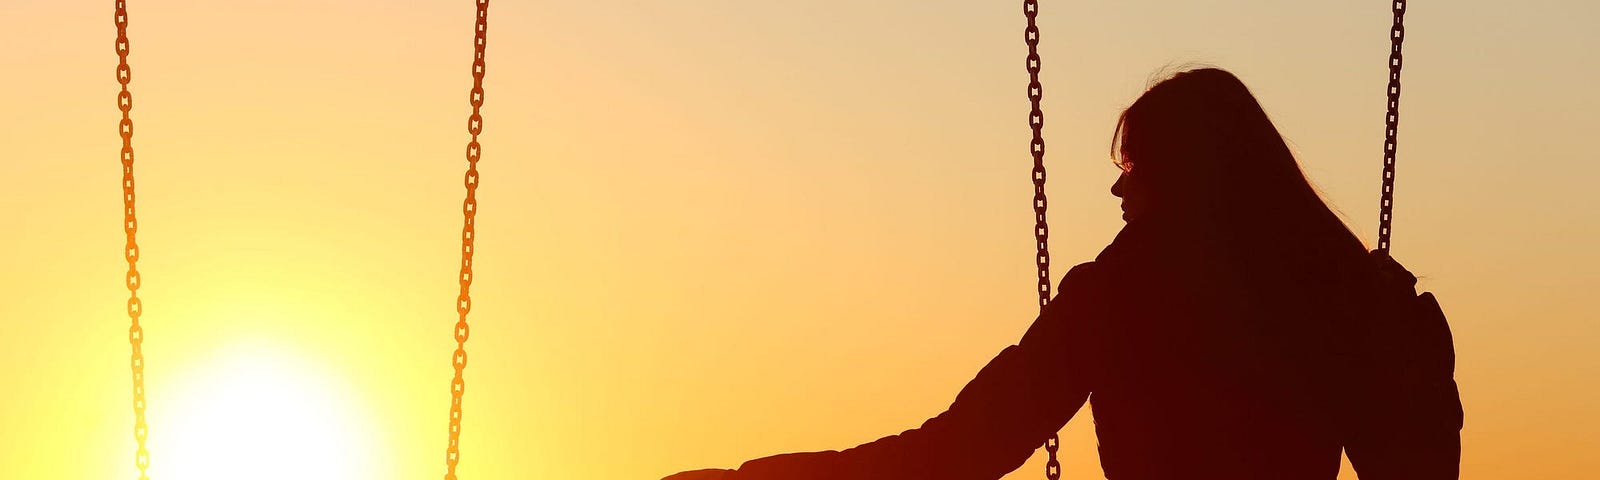 A person alone on a swing set watching the sunset.